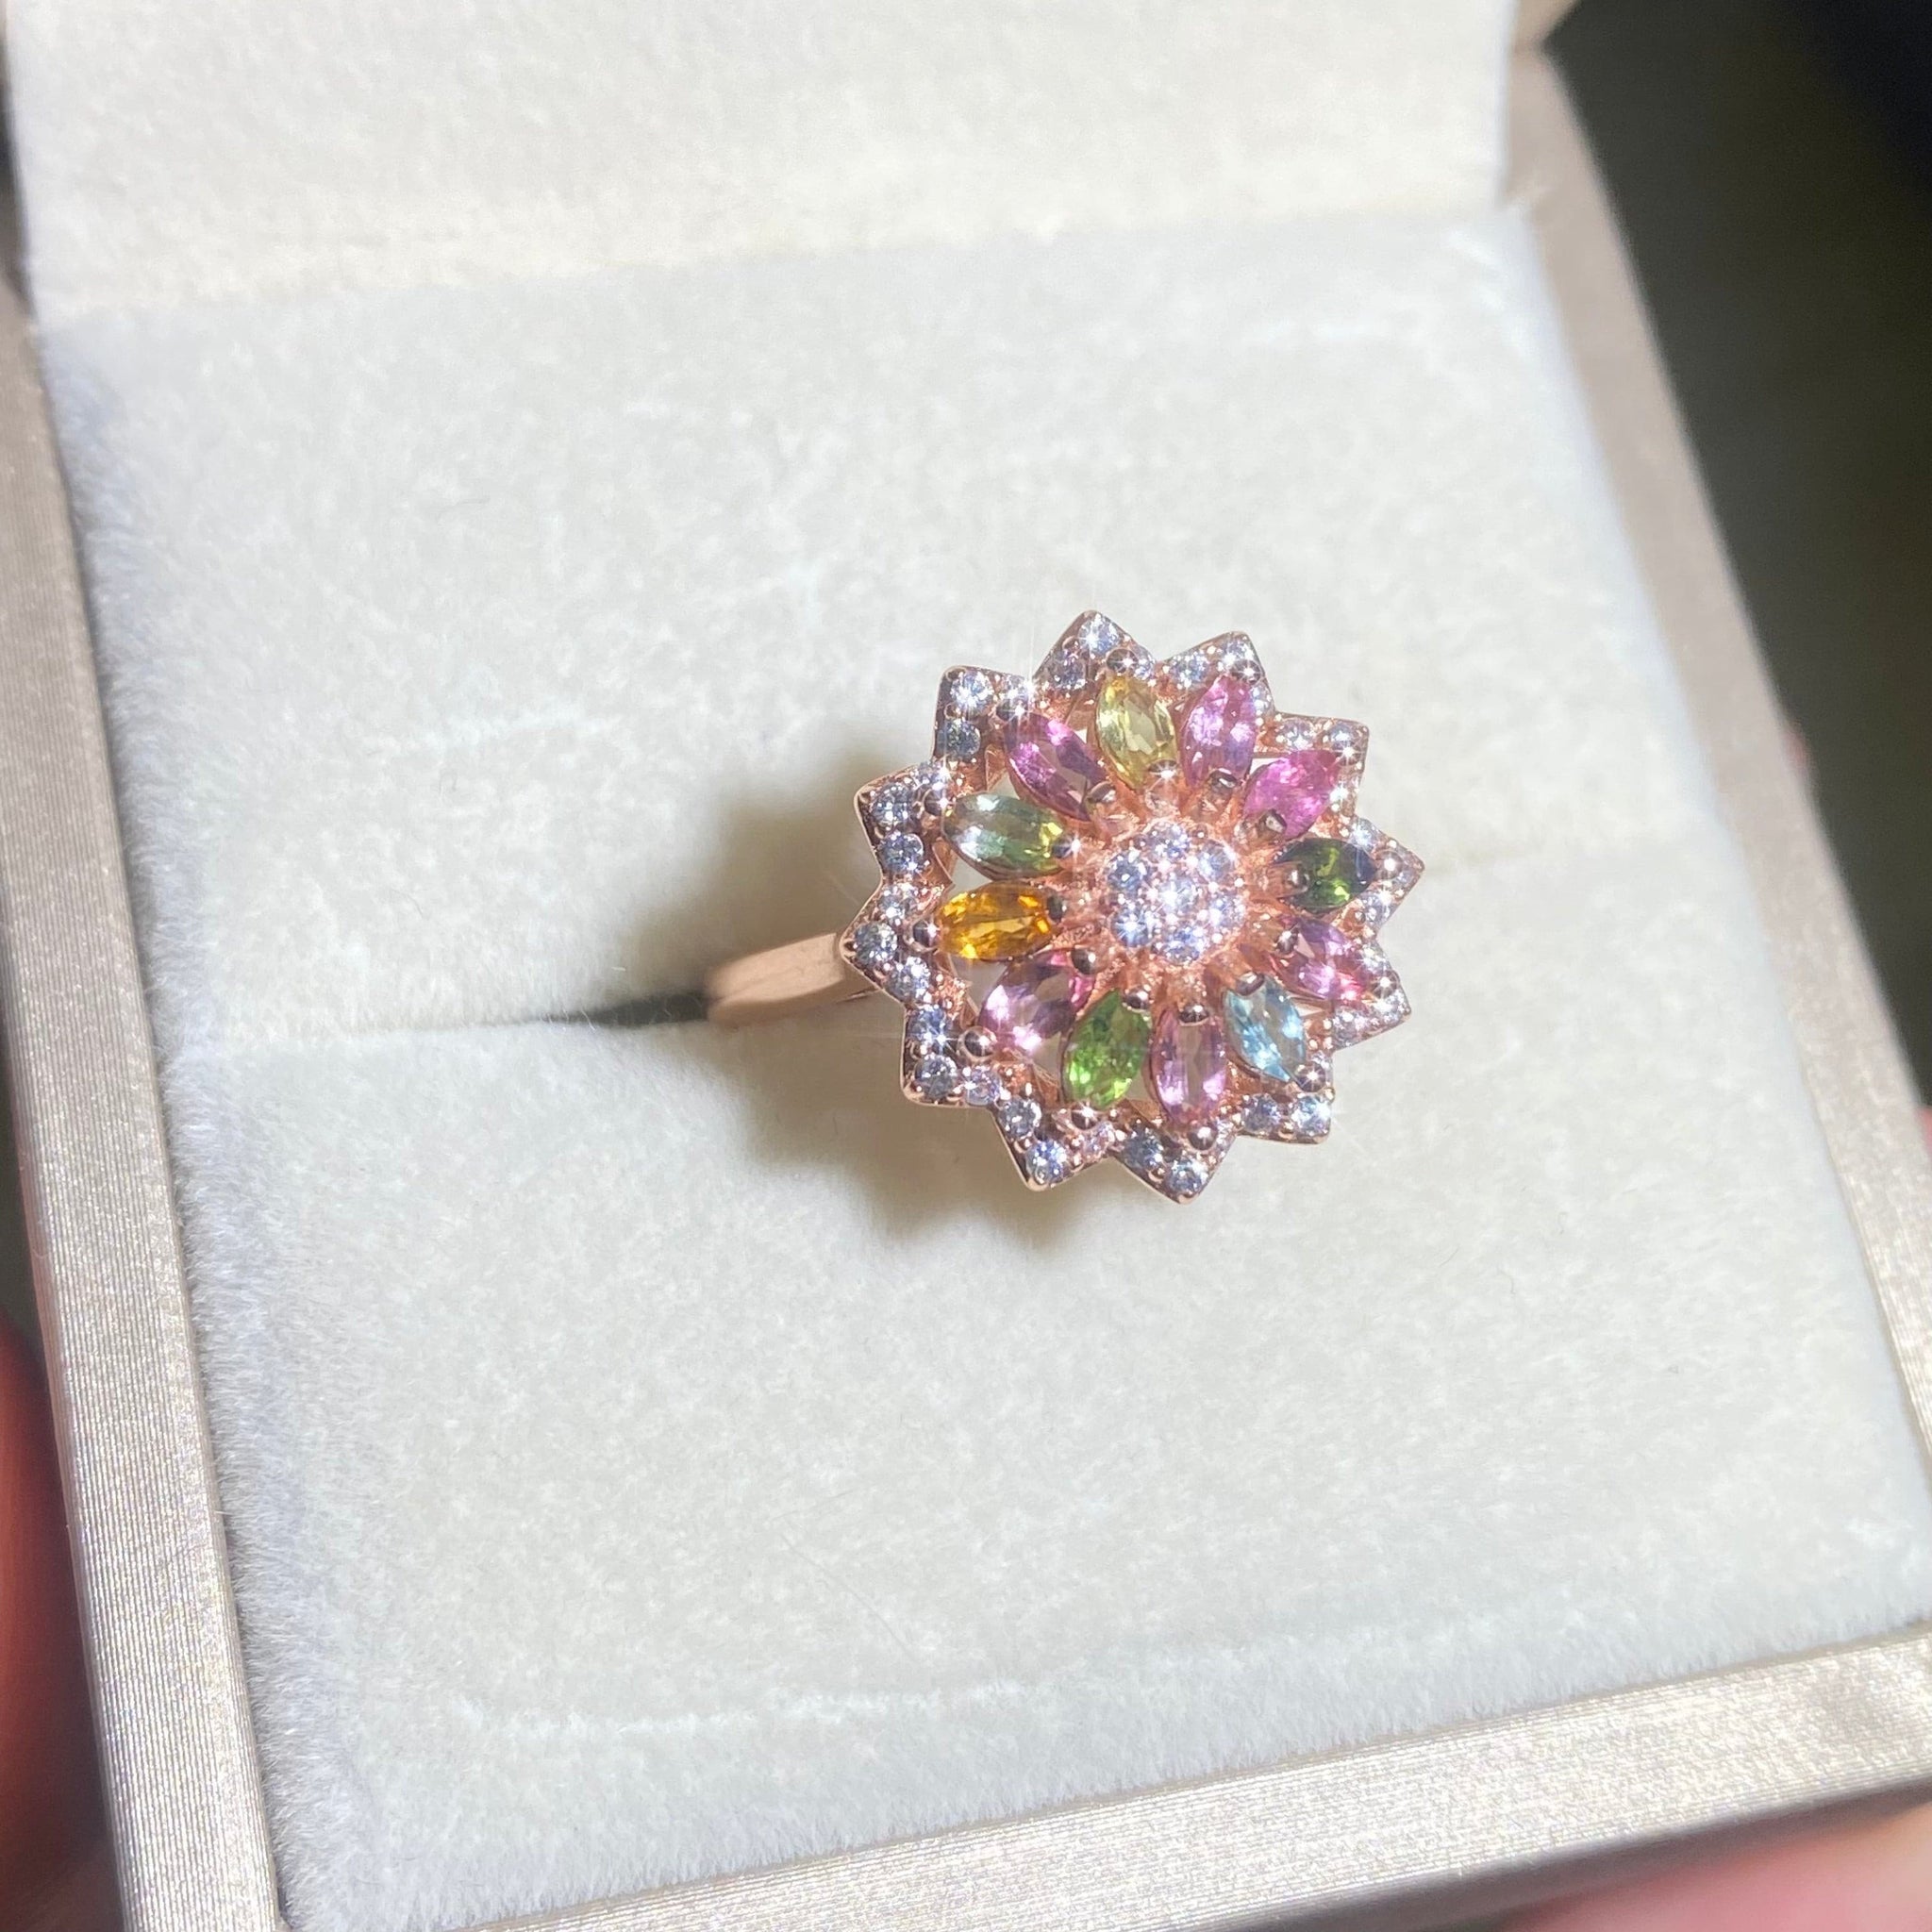 S925 sterling silver natural tourmaline firework ring.